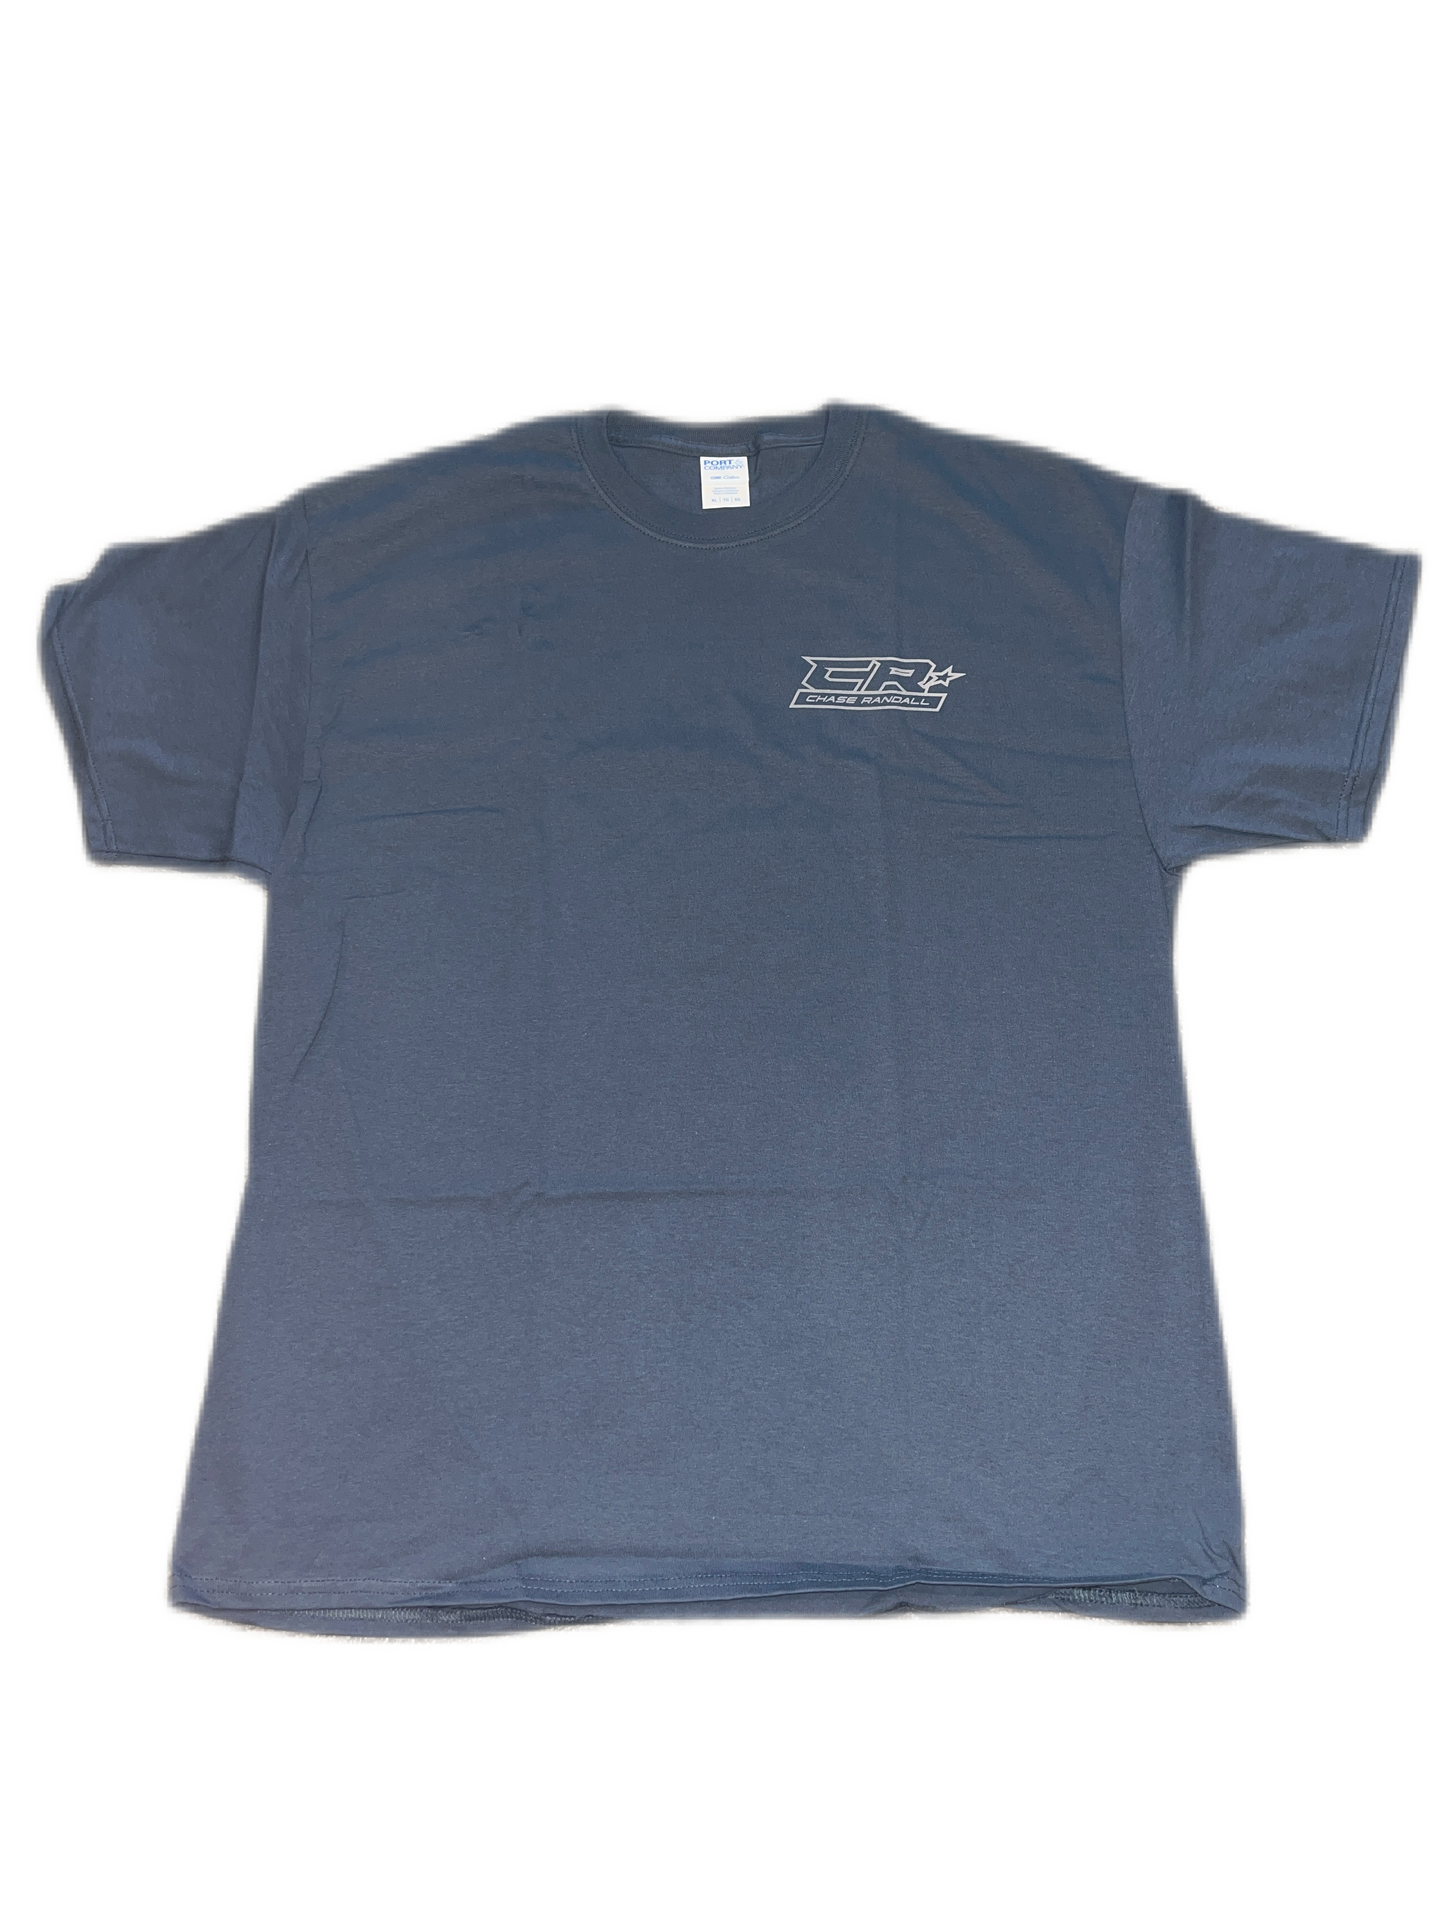 Chase Randall Lifestyle Tee - Mens